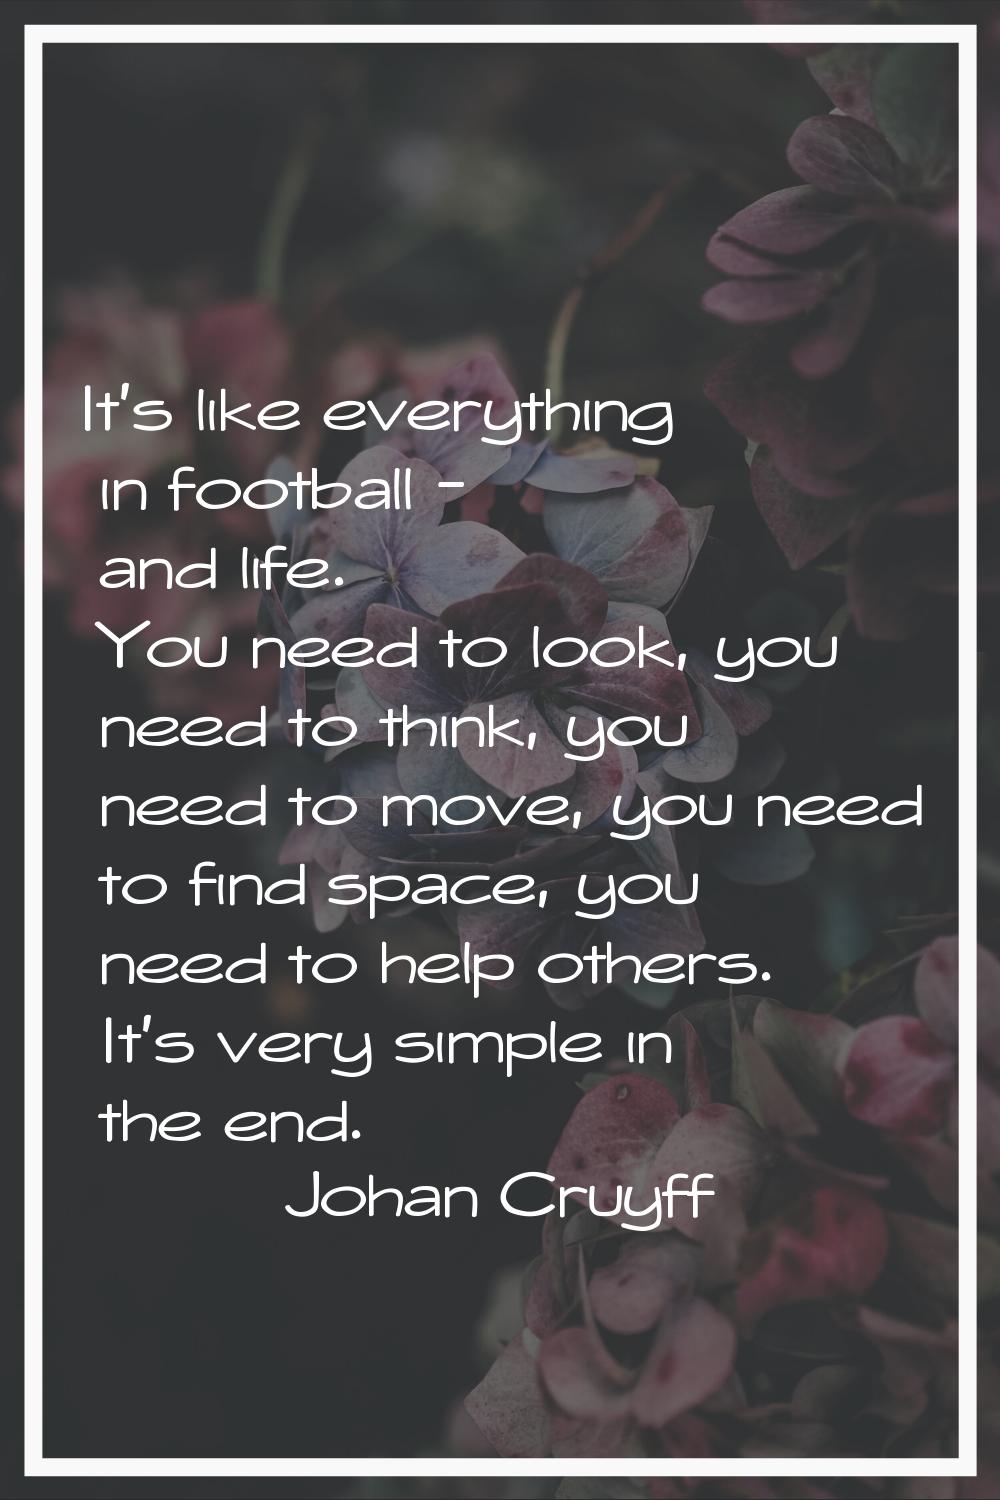 It's like everything in football - and life. You need to look, you need to think, you need to move,